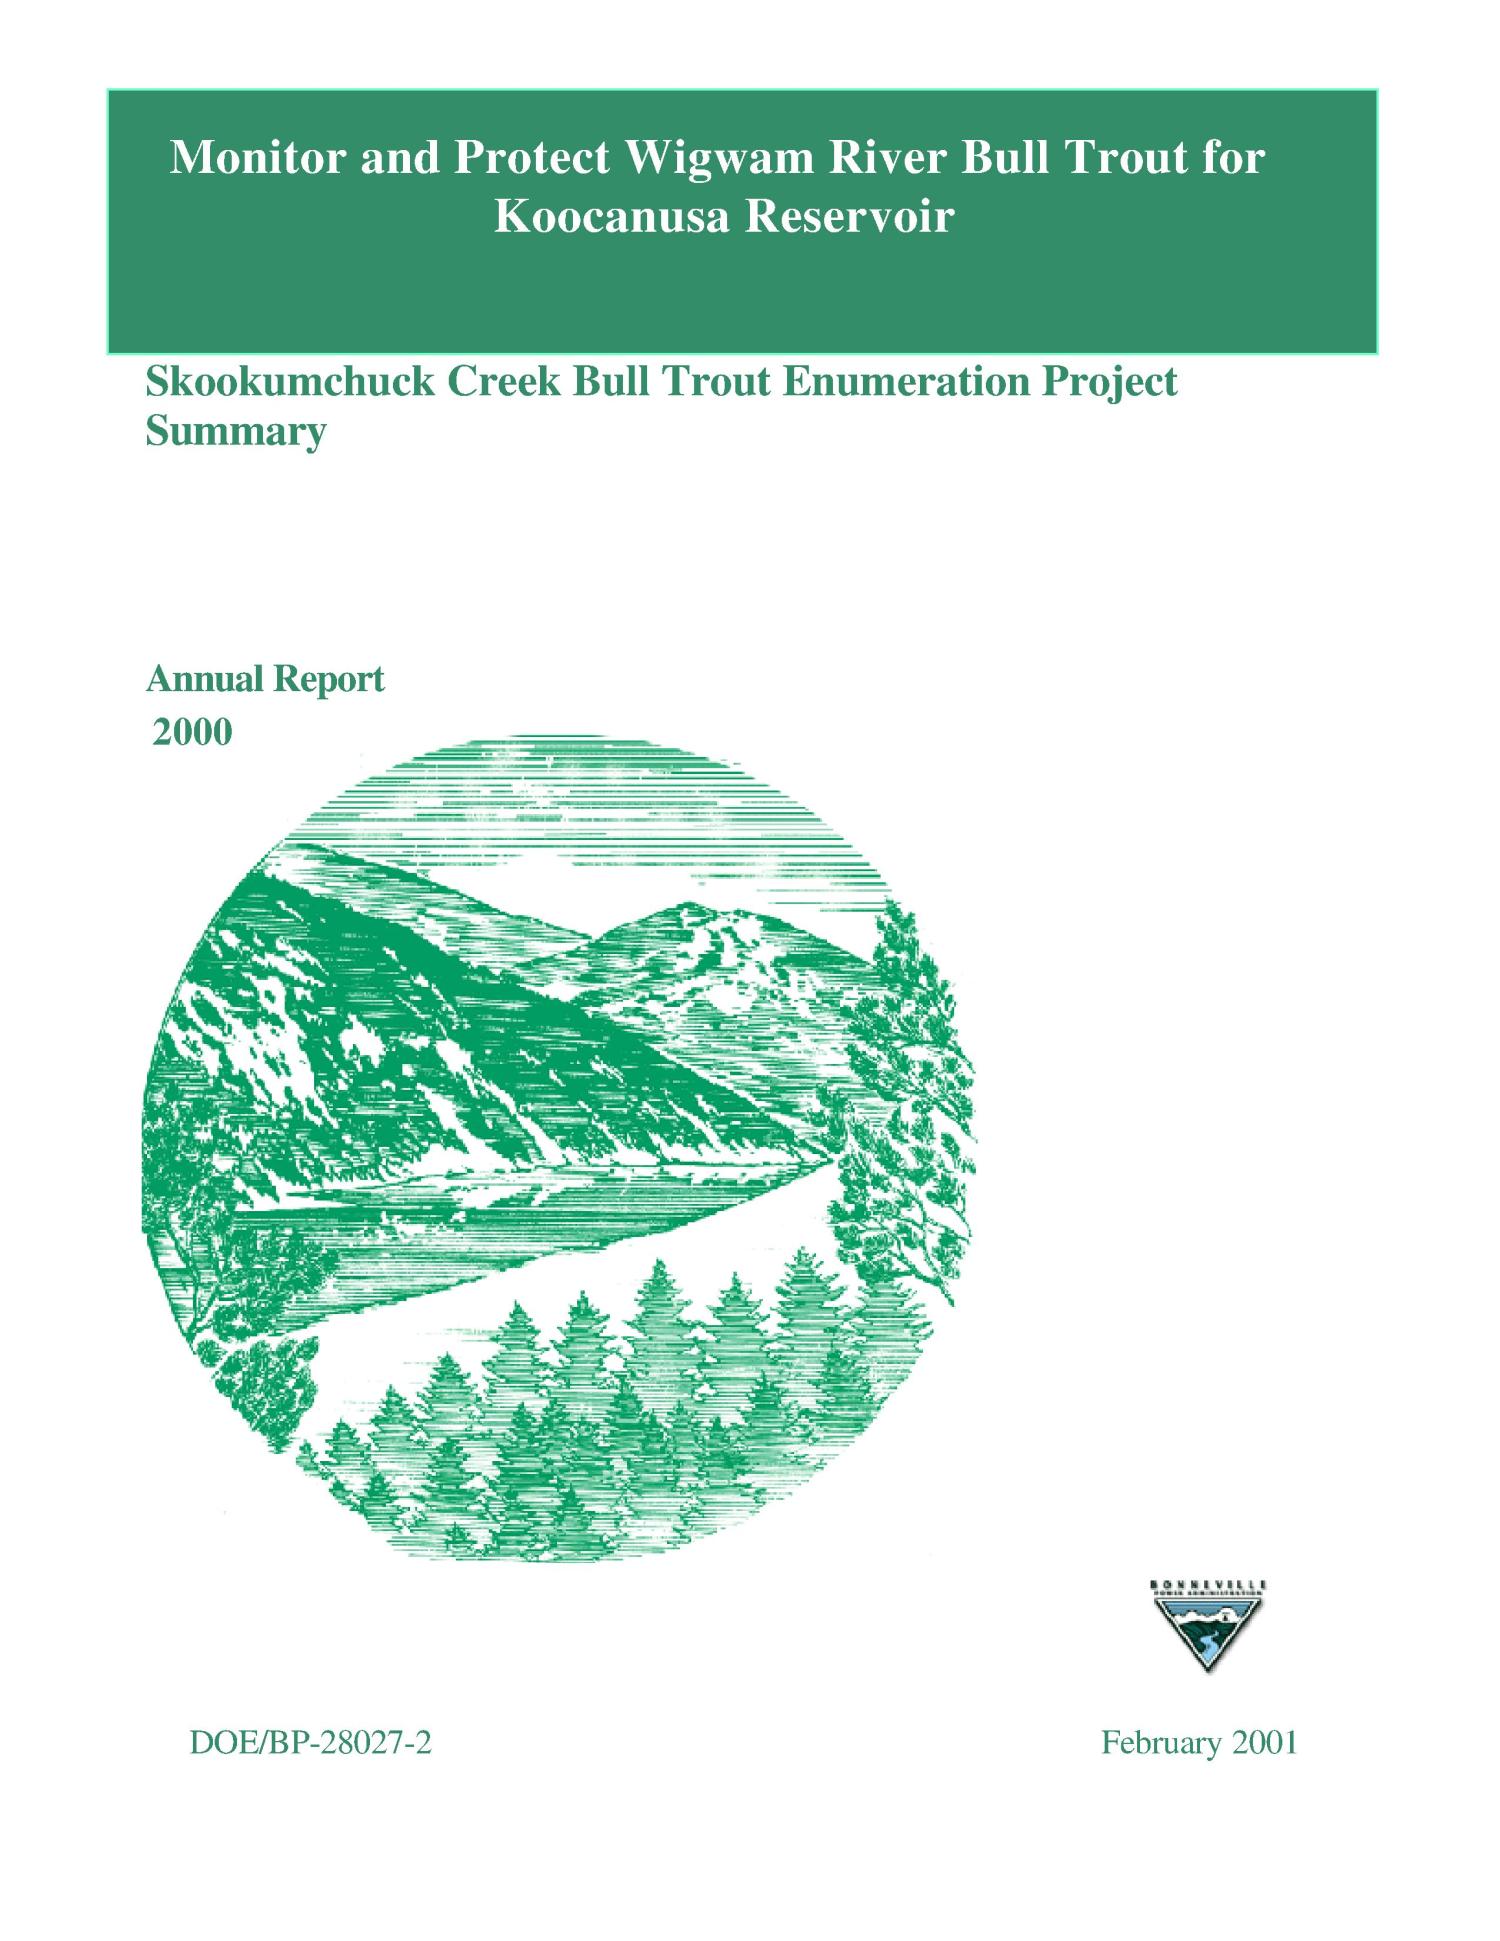 Monitor and Protect Wigwam River Bull Trout for Koocanusa Reservoir : Summary of the Skookumchuck Creek Bull Trout Enumeration Project, Annual Report 2000.
                                                
                                                    [Sequence #]: 1 of 38
                                                